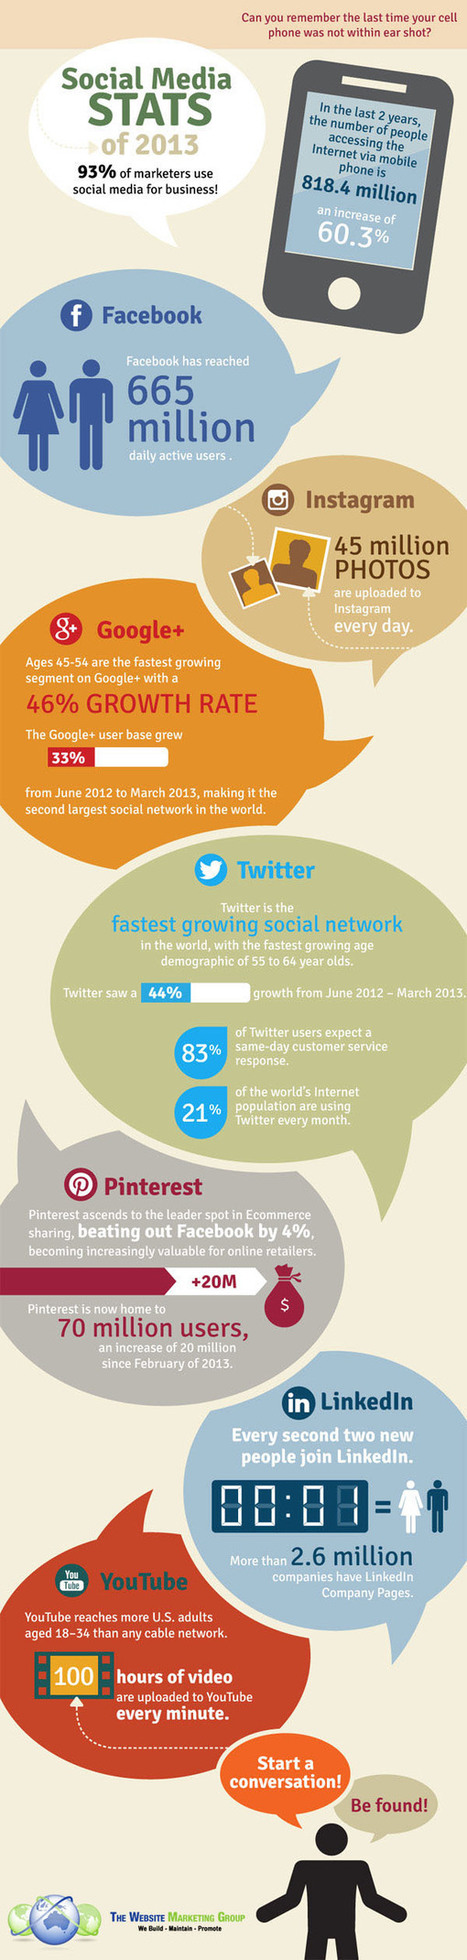 Social Media Infographic 2013 : Which platform is growing the fastest? | digital marketing strategy | Scoop.it